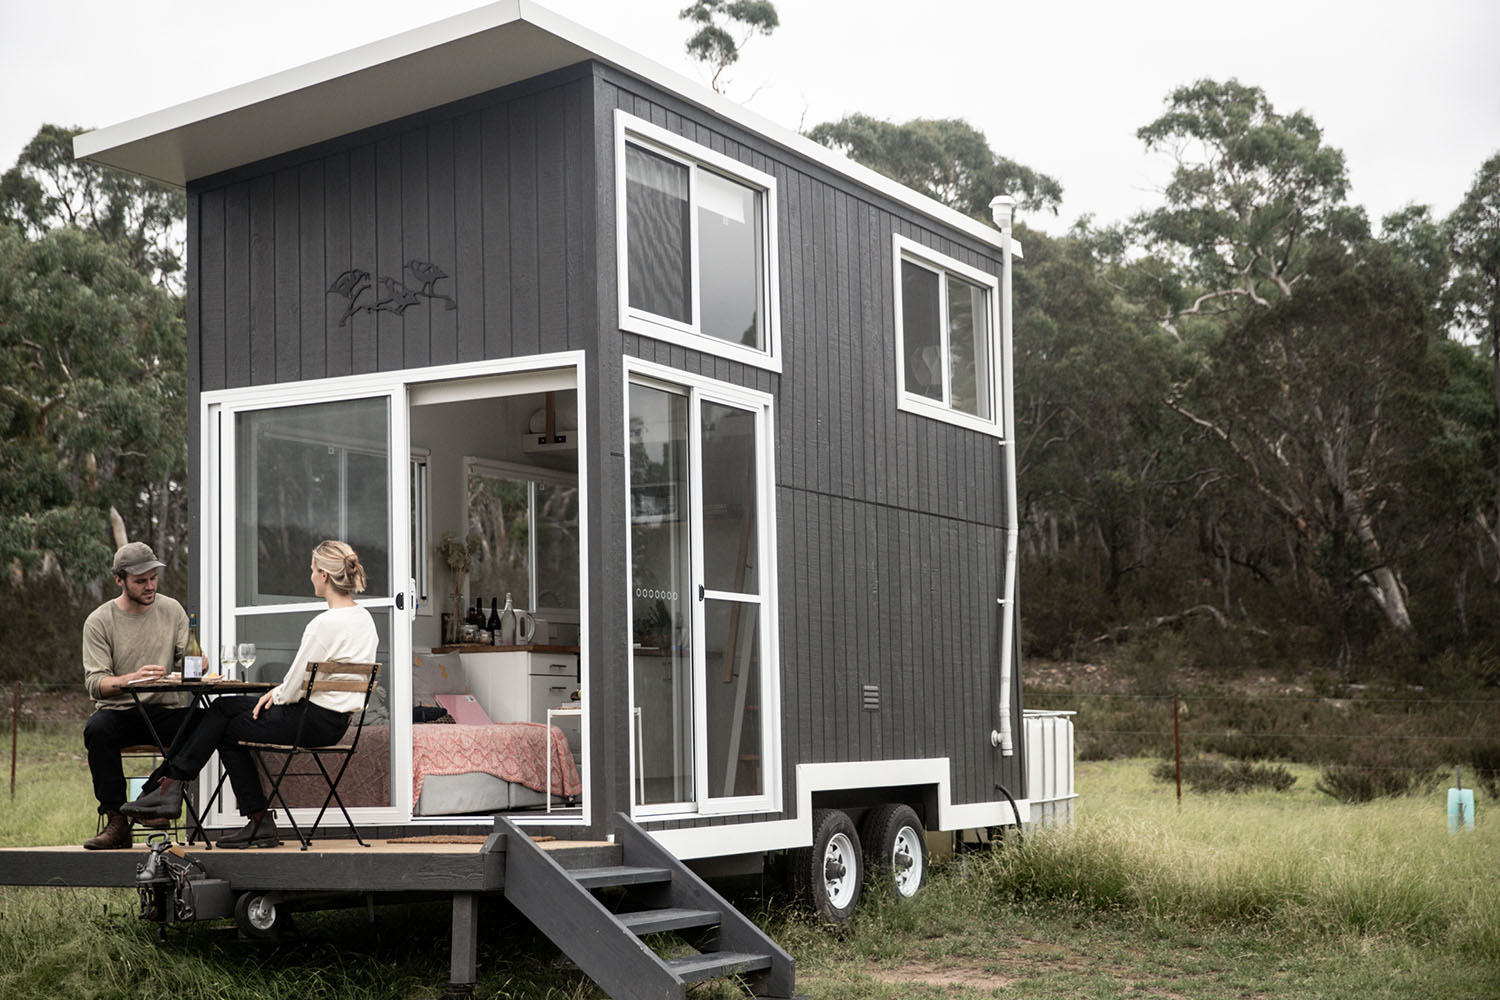 Where Can You Legally Park a Tiny Home On Wheels in California